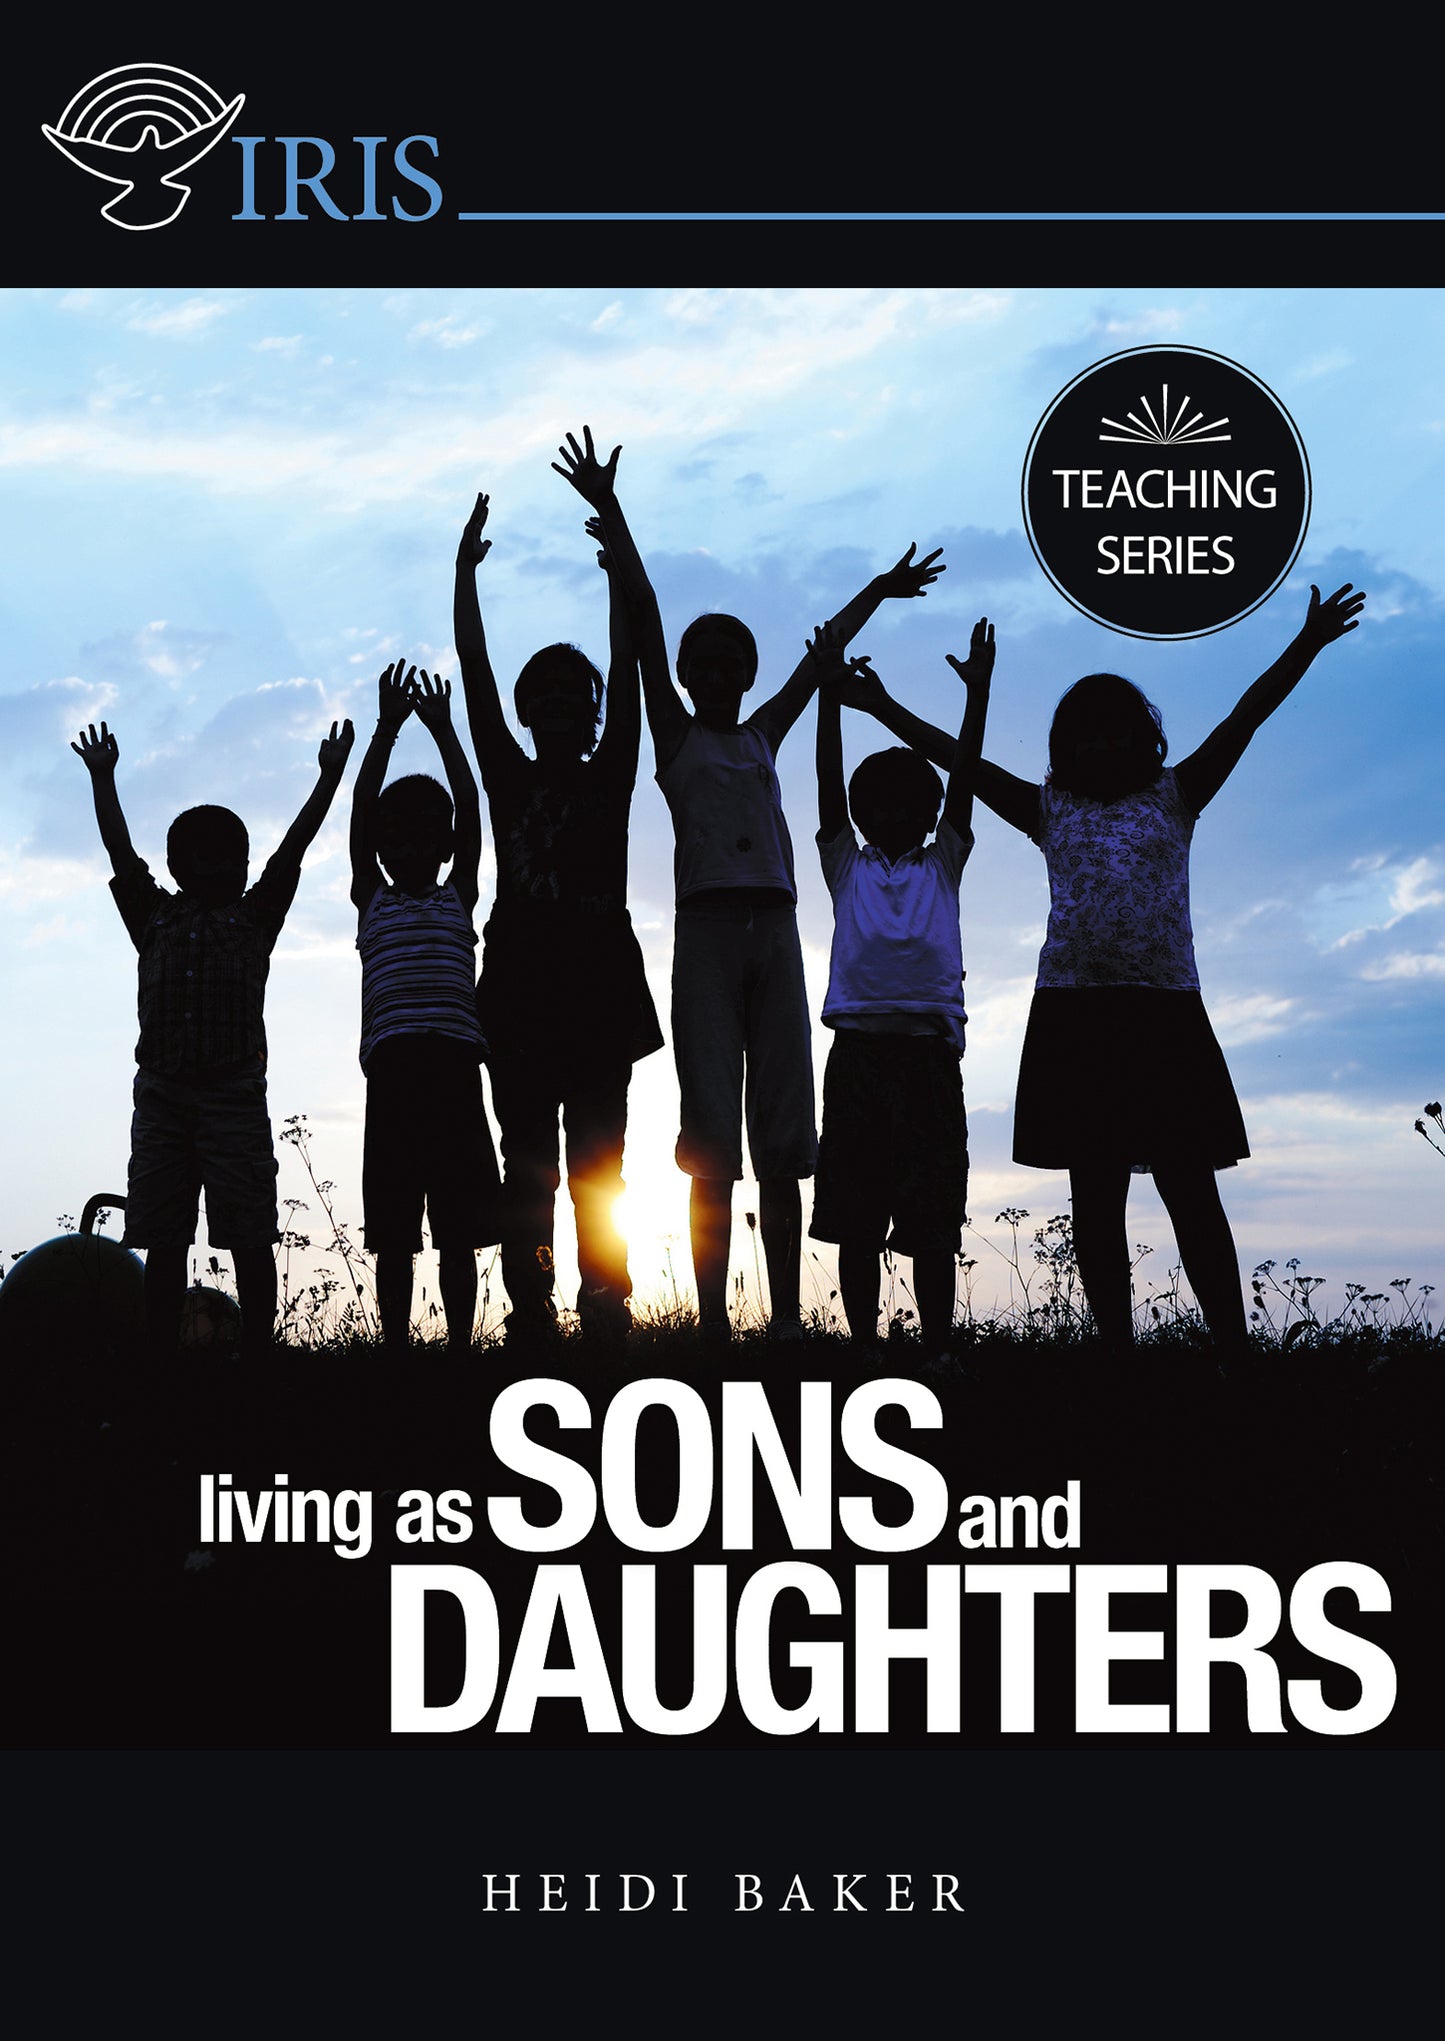 Living as Sons and Daughters